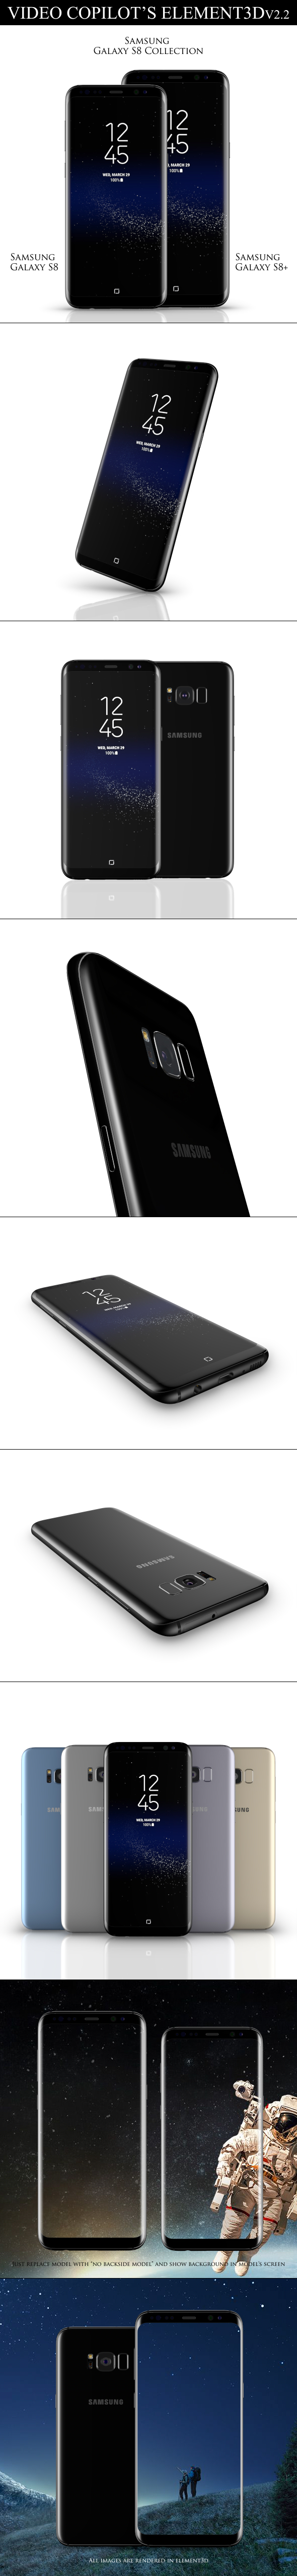 Element3D - Samsung Galaxy S8 Collection